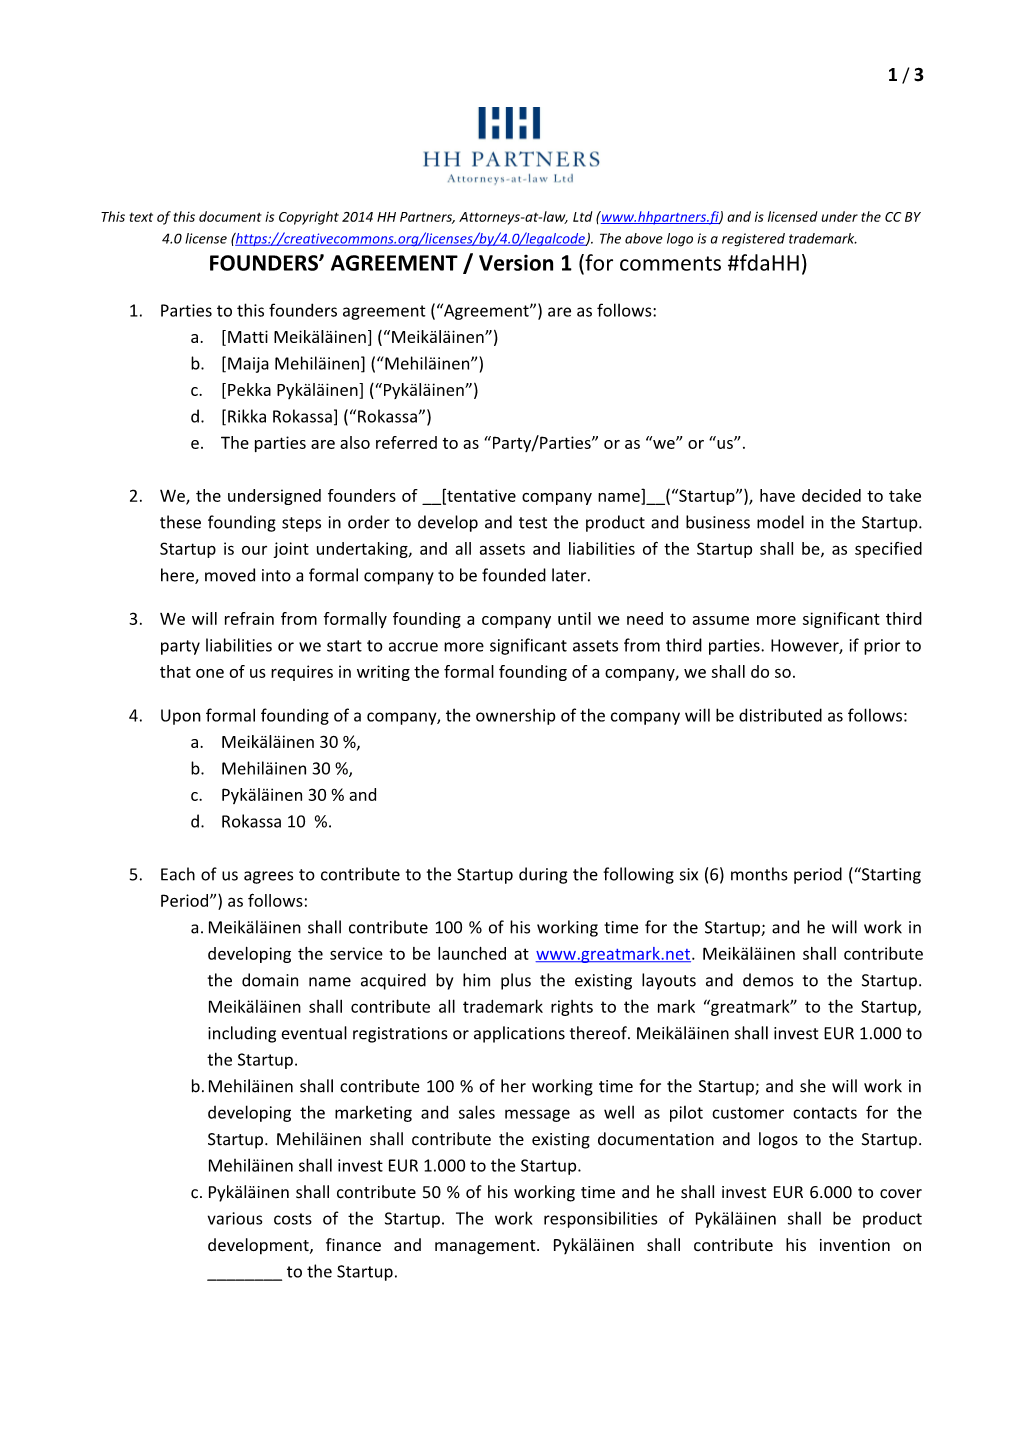 FOUNDERS AGREEMENT / Version 1 (For Comments #Fdahh)